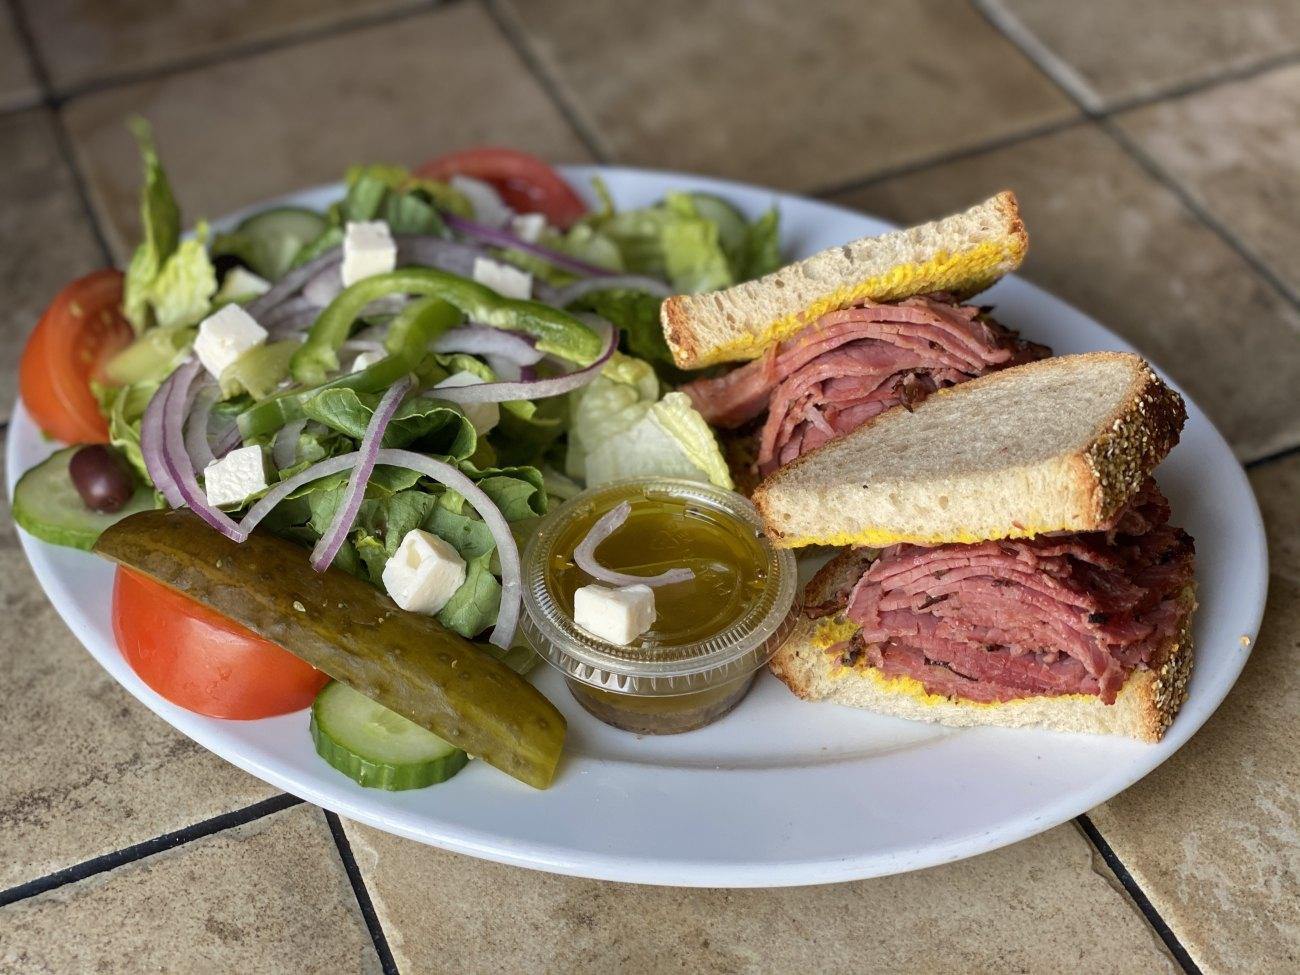 As du Smoked Meat, L'Assomption, L'Assomption - Smoked Meat Cuisine Restaurant